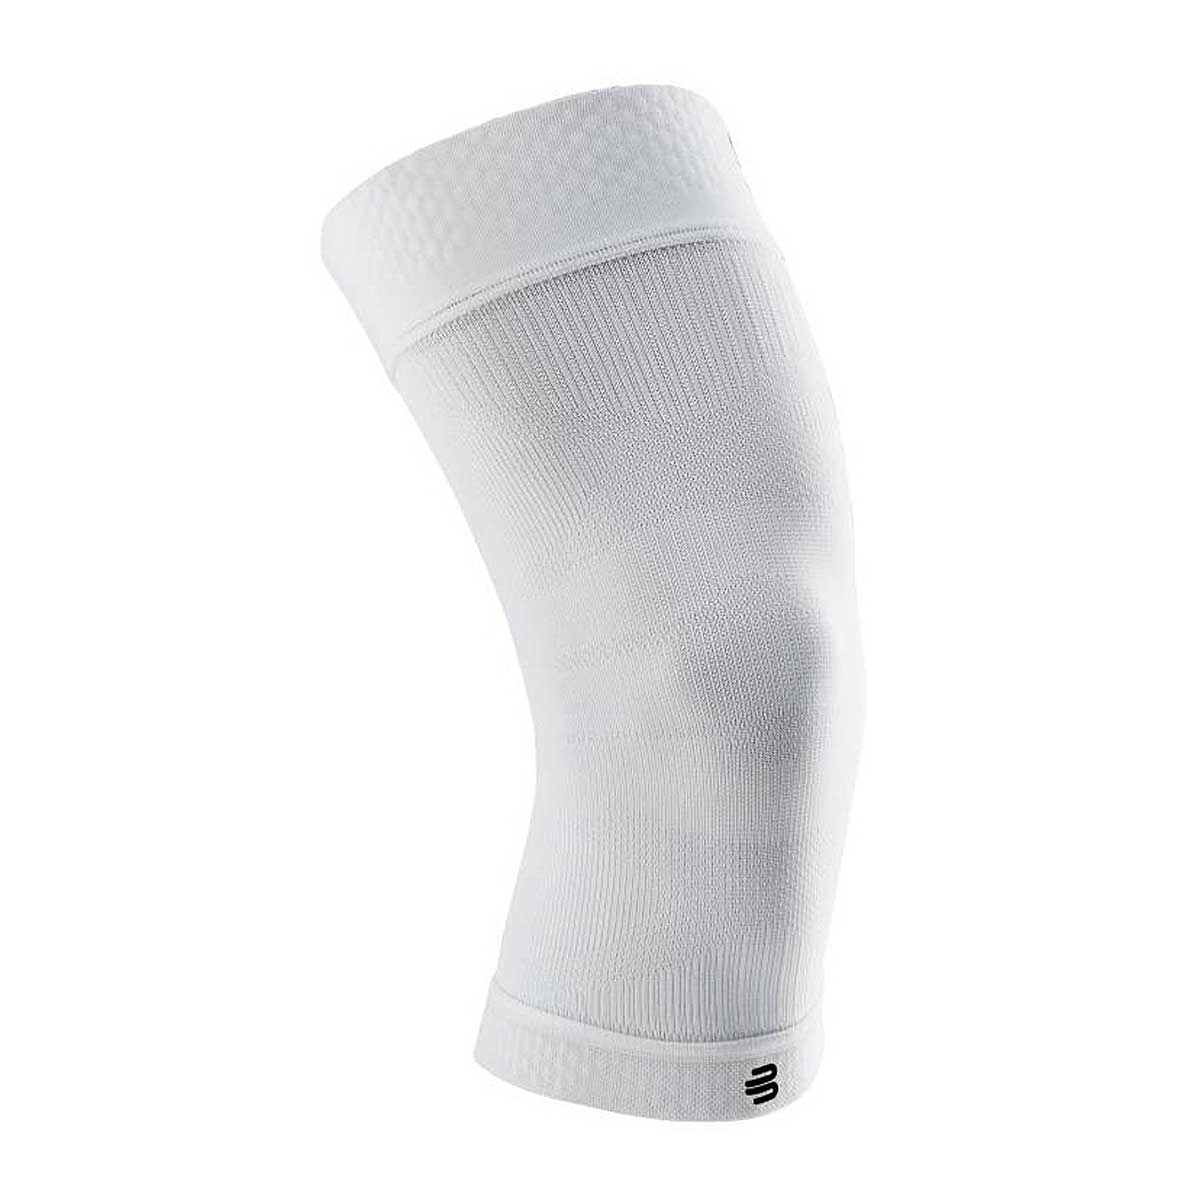 Image of Bauerfeind Sports Compression Knee Support, White